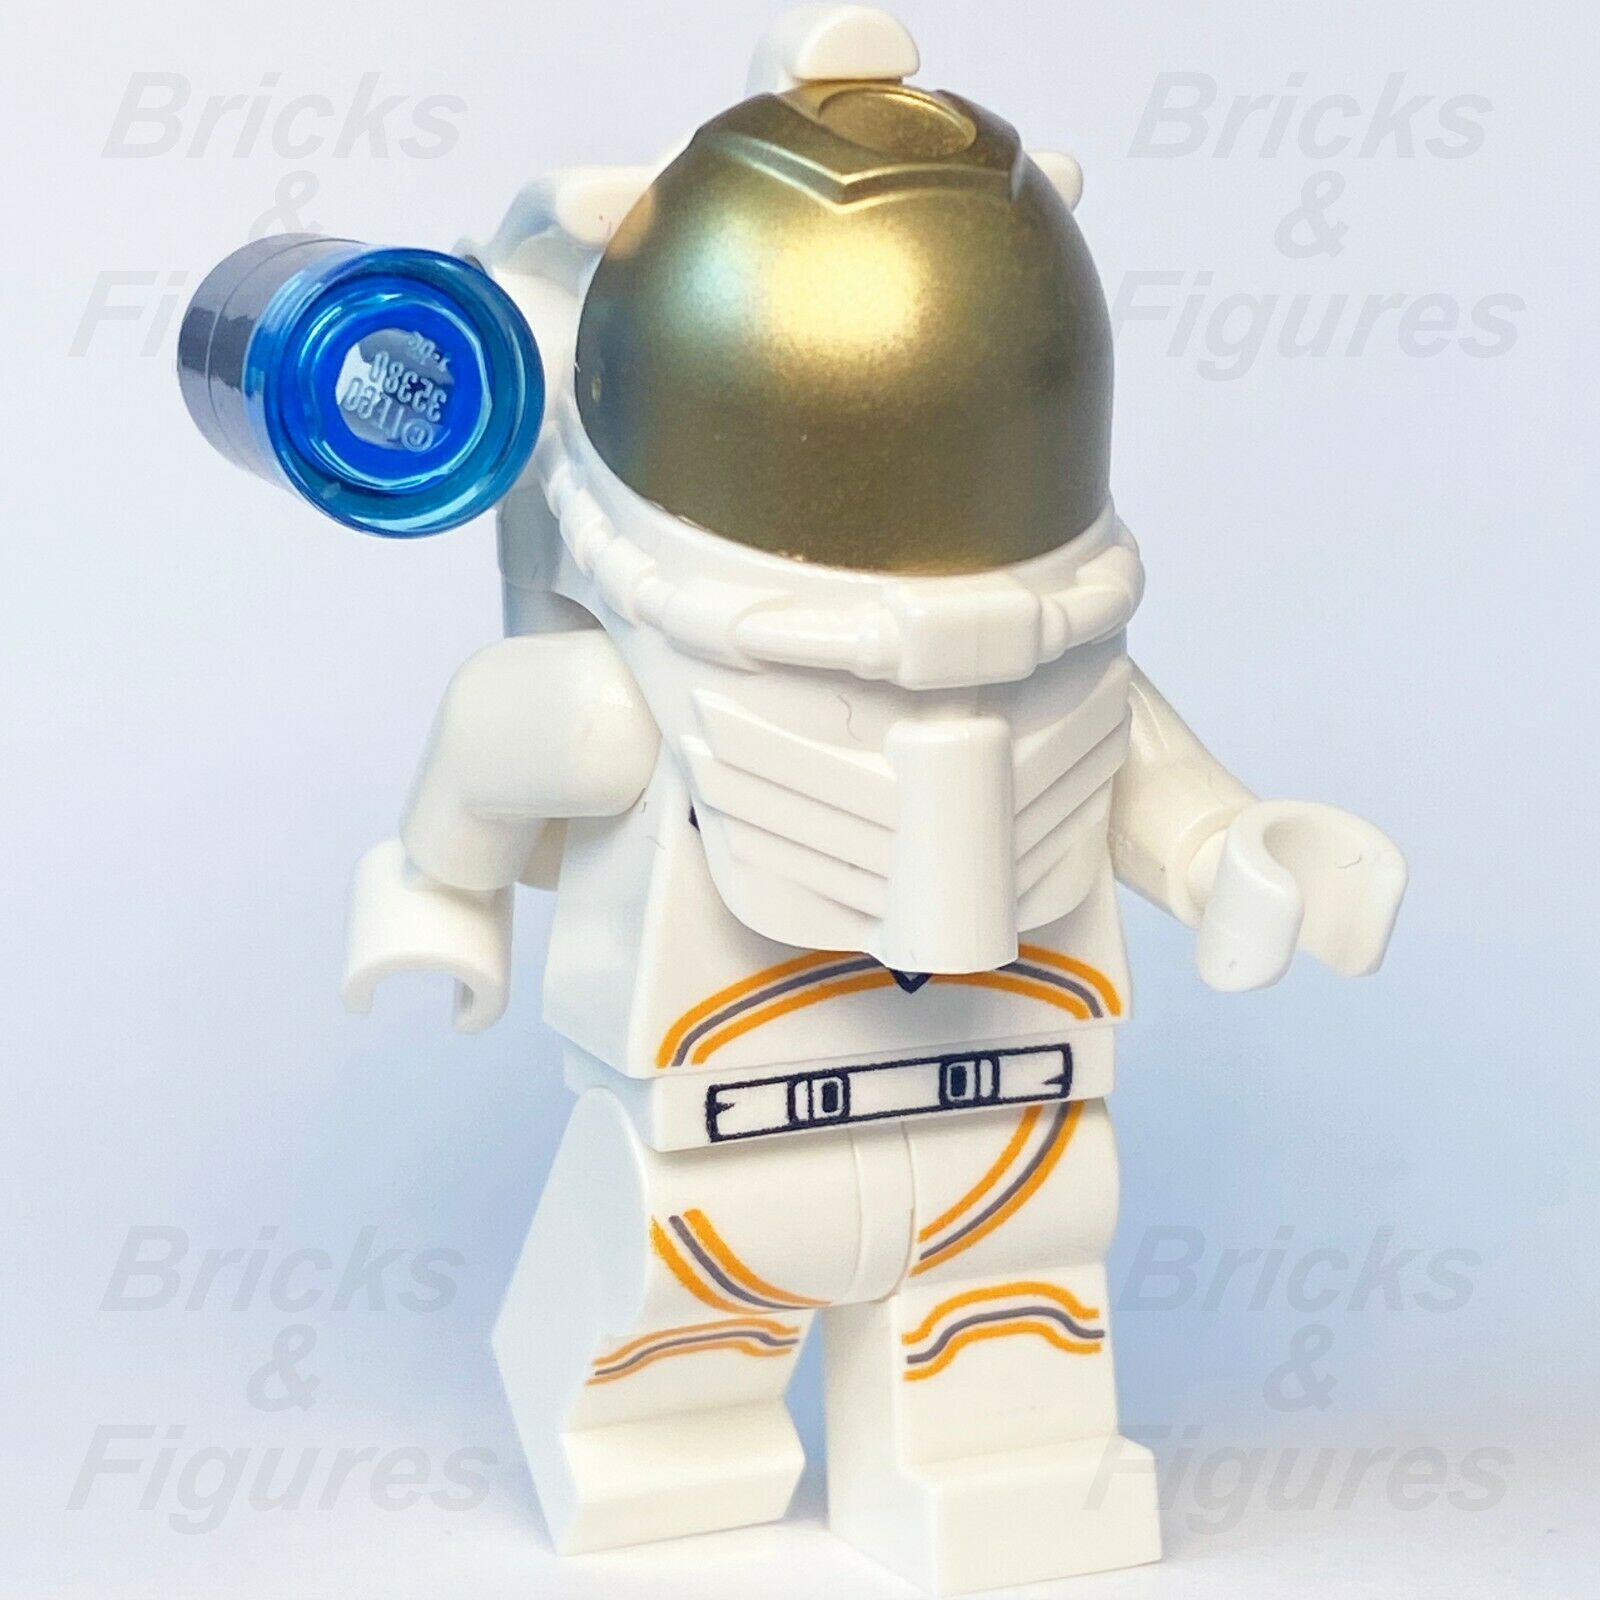 New Town City LEGO Astronaut Male with Side Lamp Space Port Minifigure 30365 - Bricks & Figures